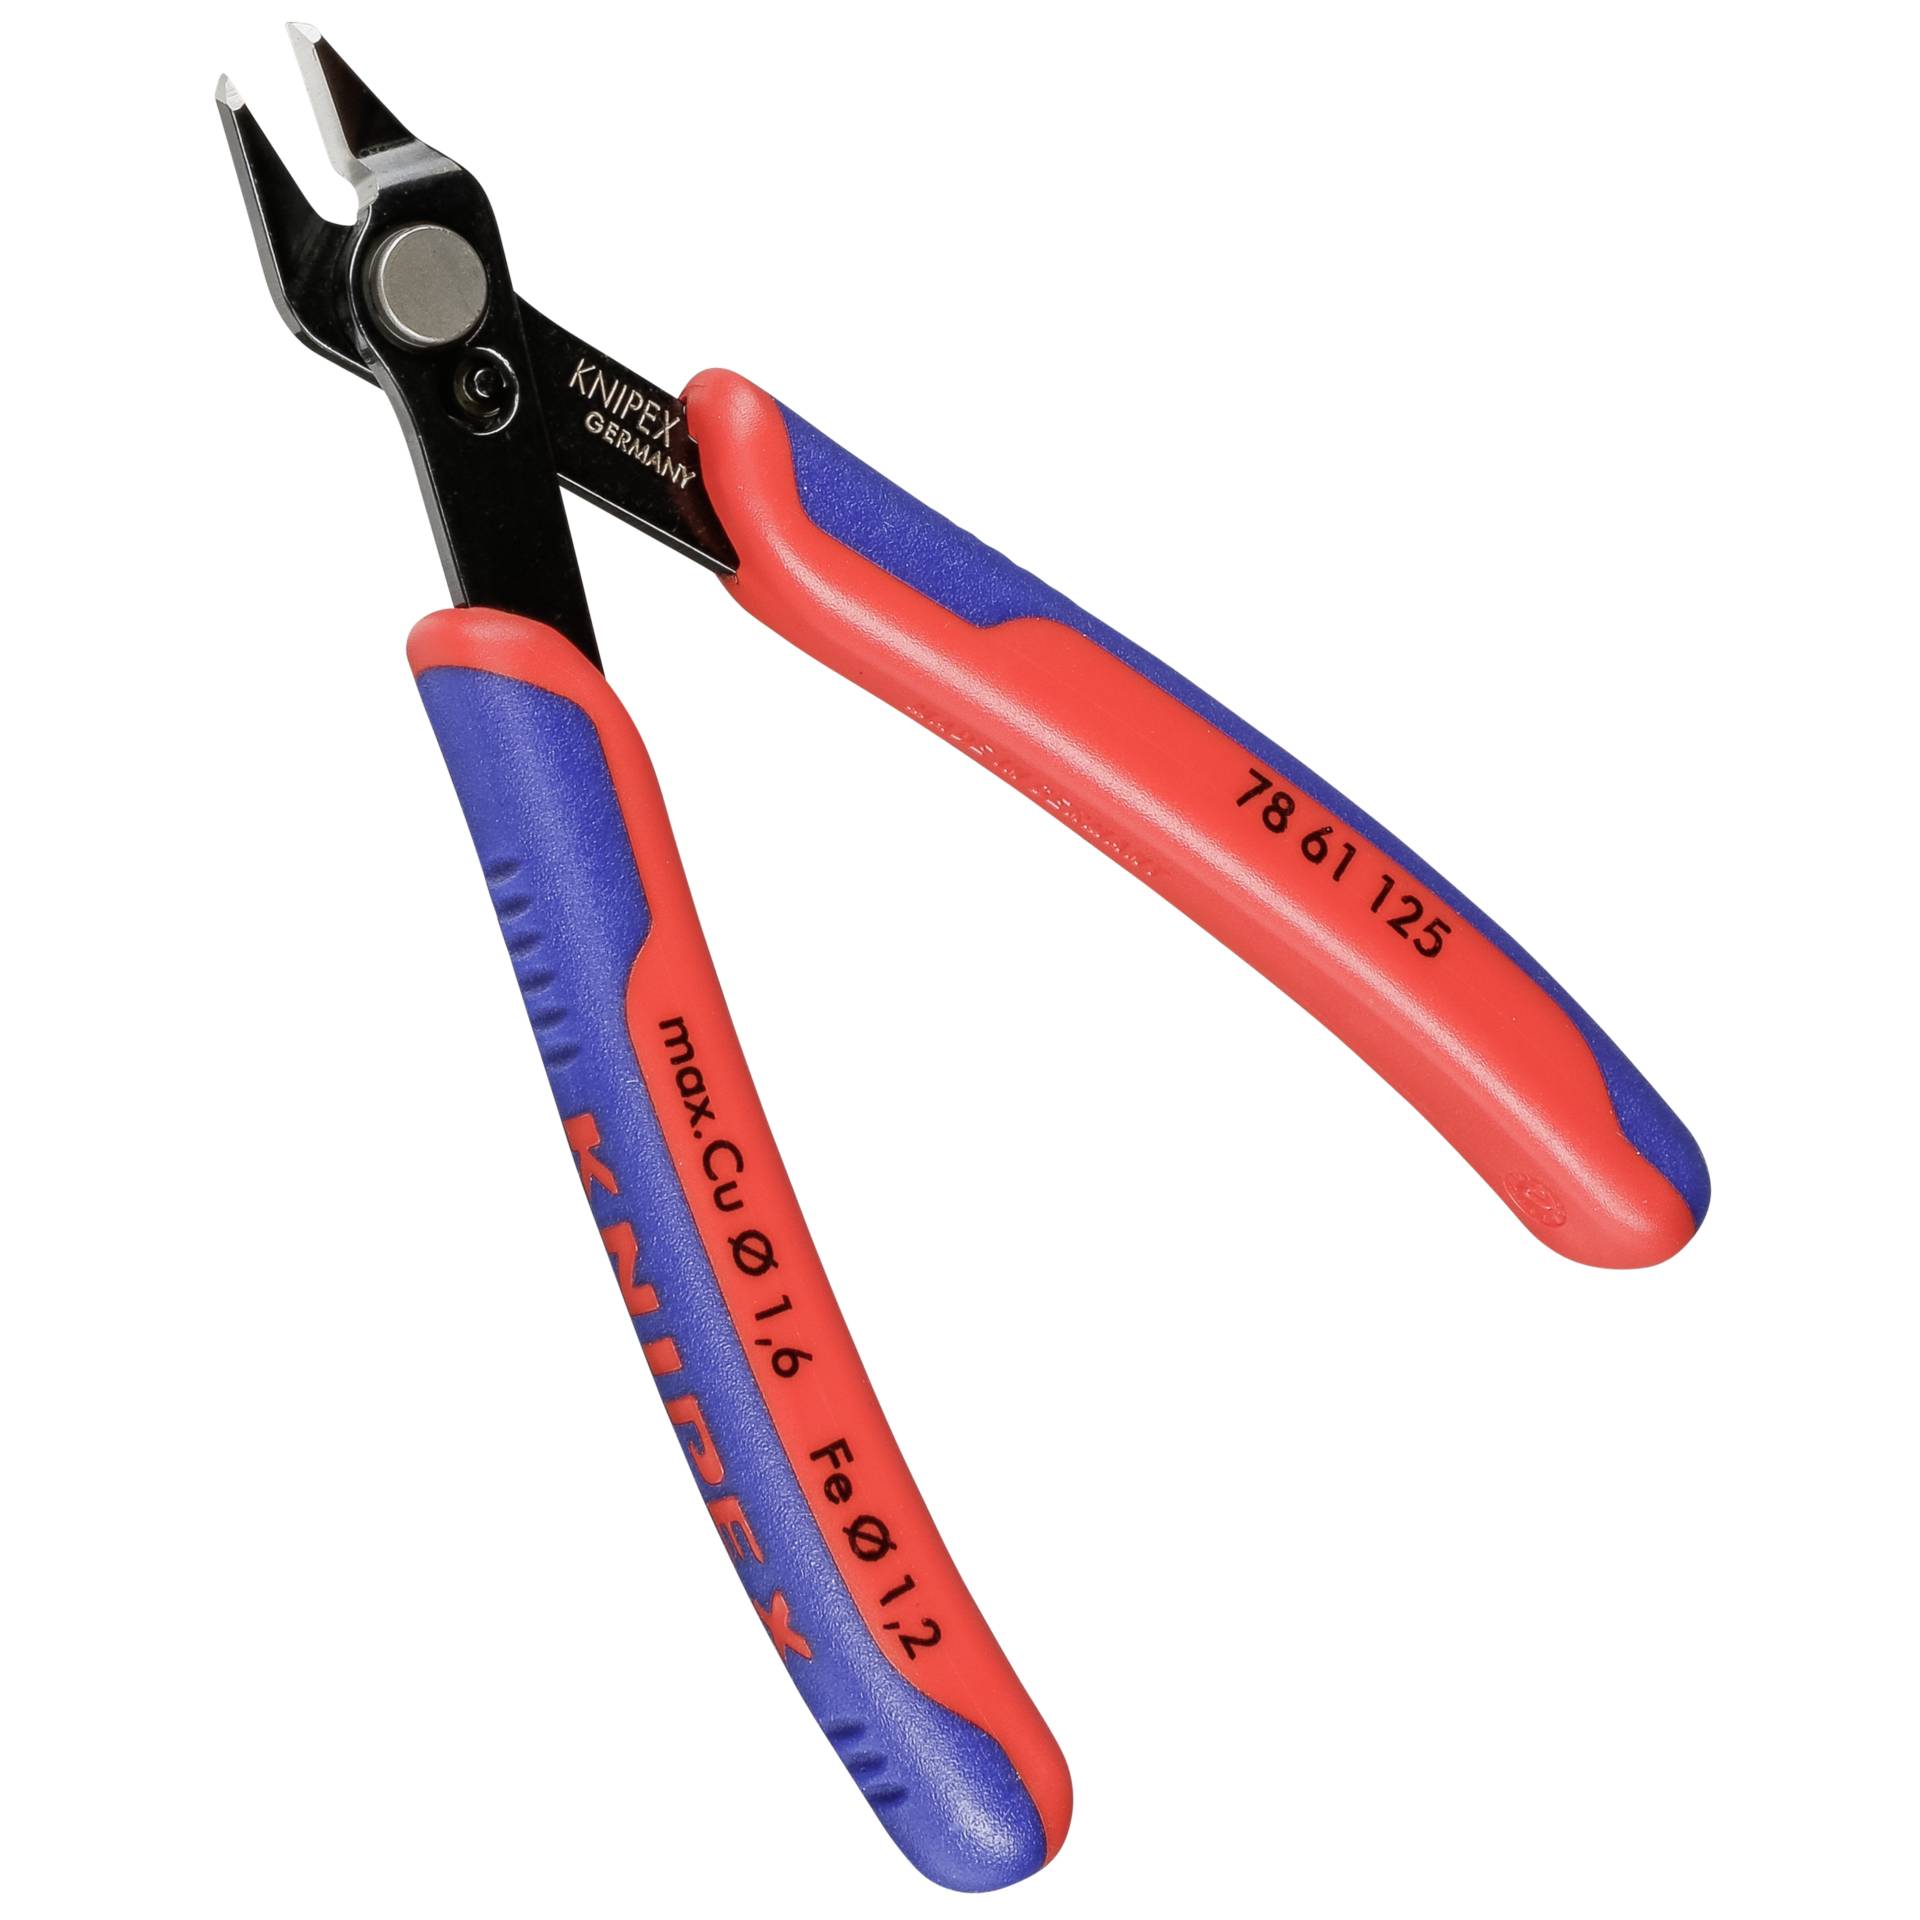 KNIPEX Electronic Super Knips brunito 125 mm